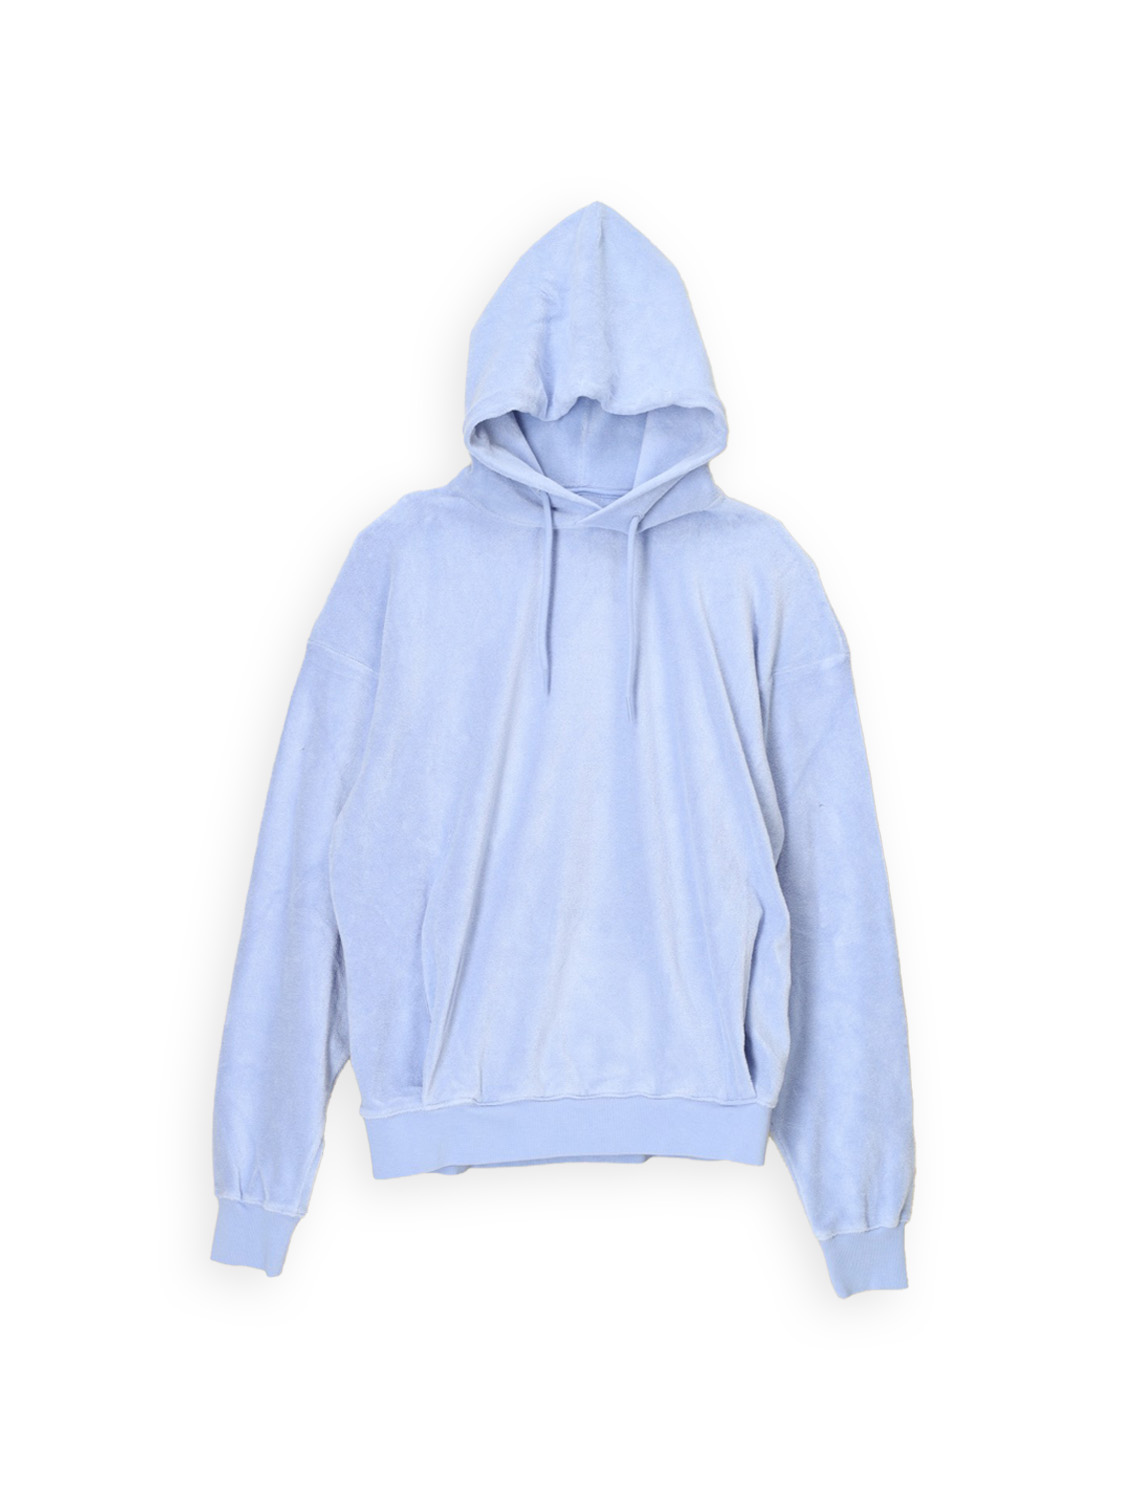 Classic terrycloth hoodie made from cotton blend 